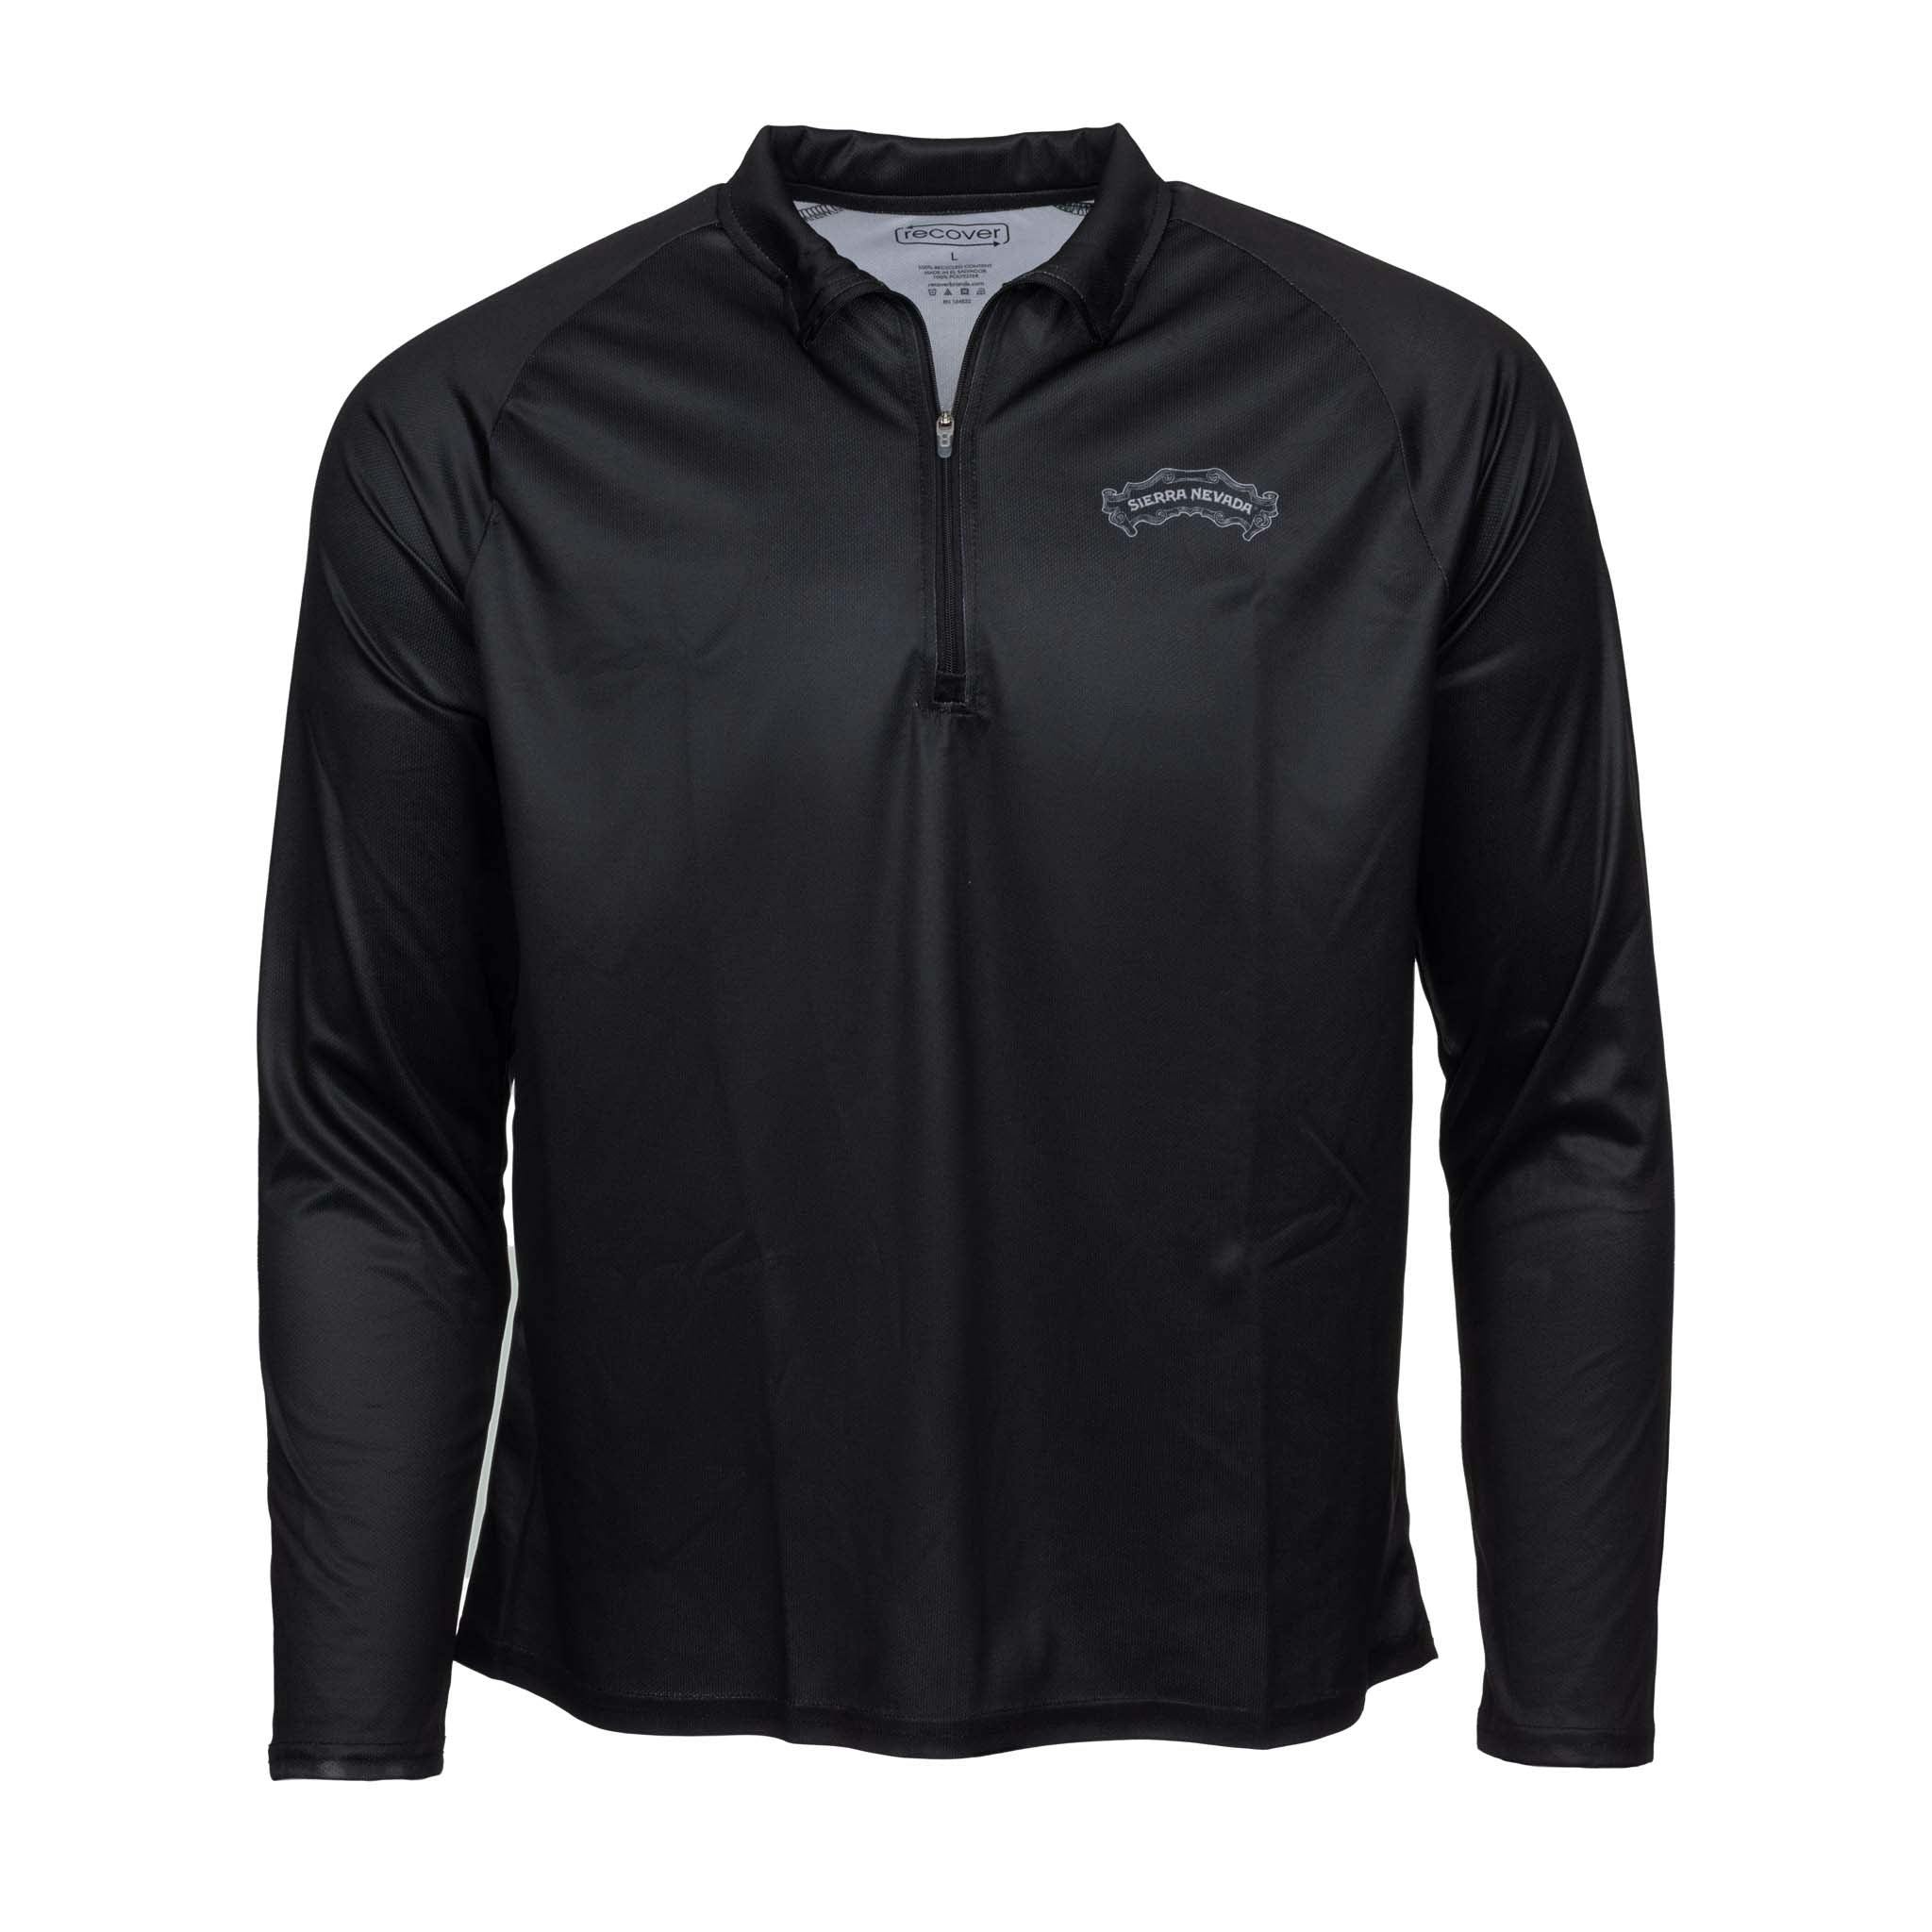 Sierra Nevada Recover Sport 1/4 Zip Black Pullover - Front view